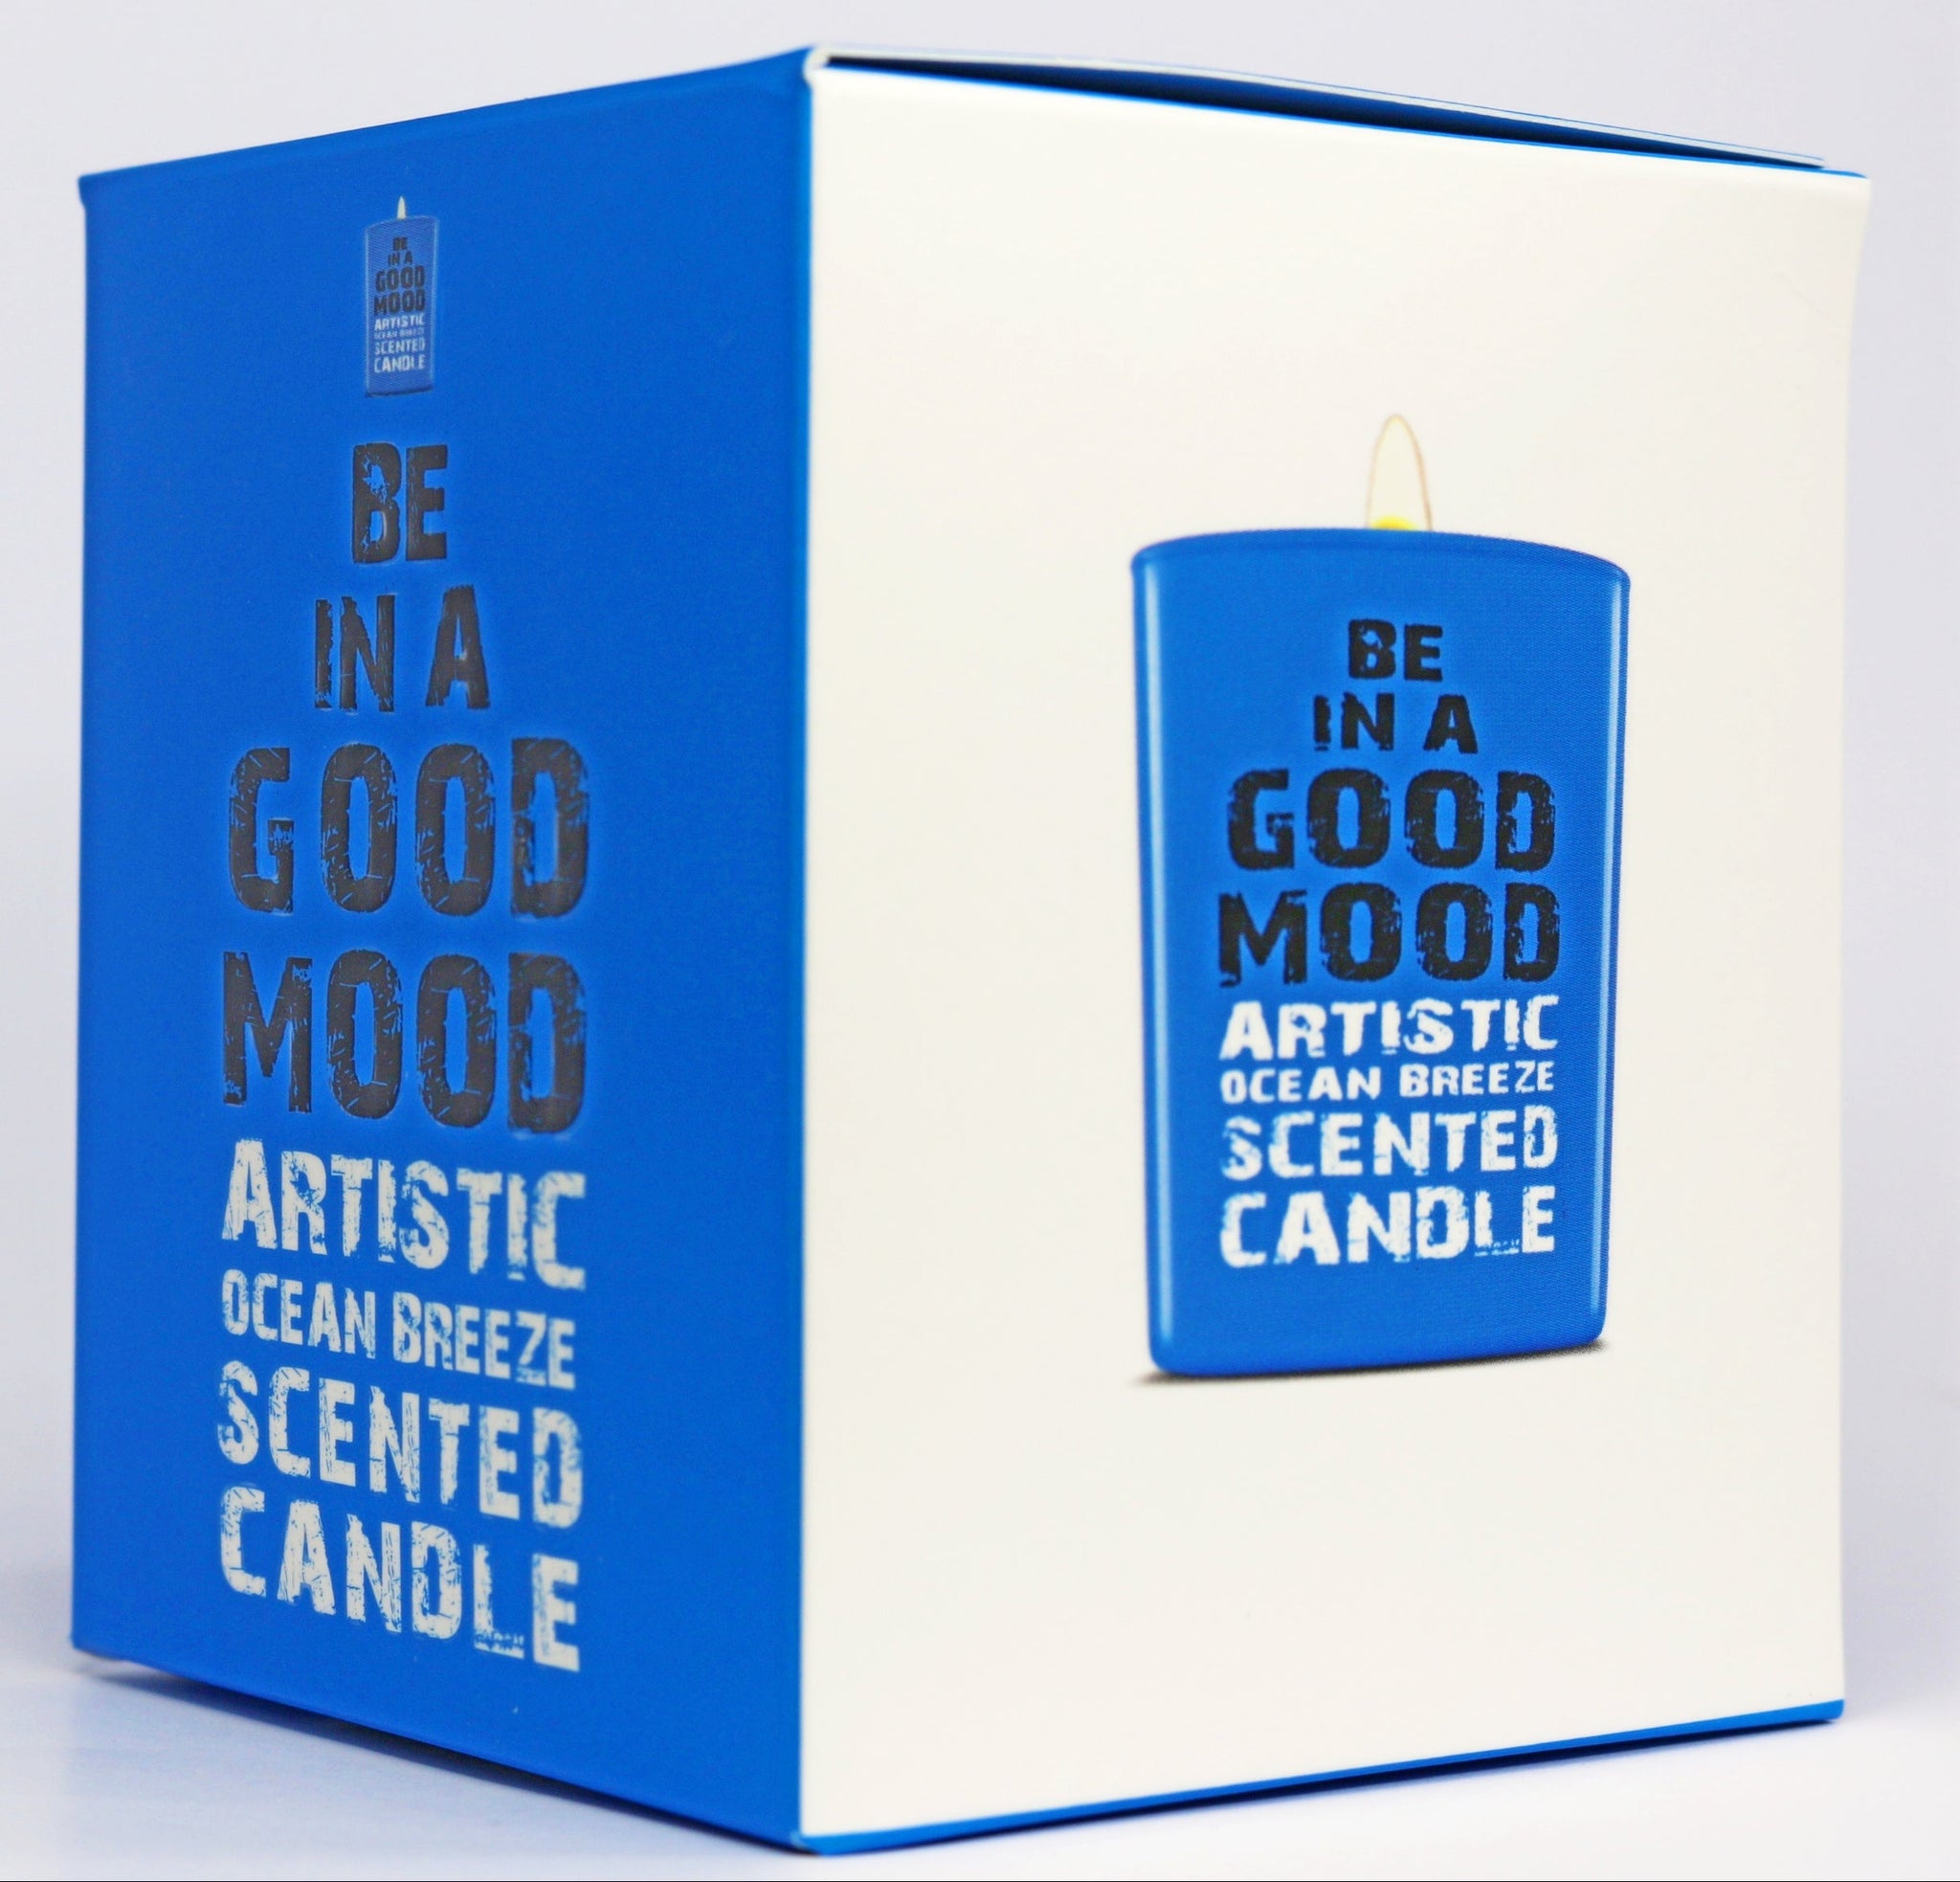 Be in a Good Mood Artistic Ocean Breeze Scented Candle